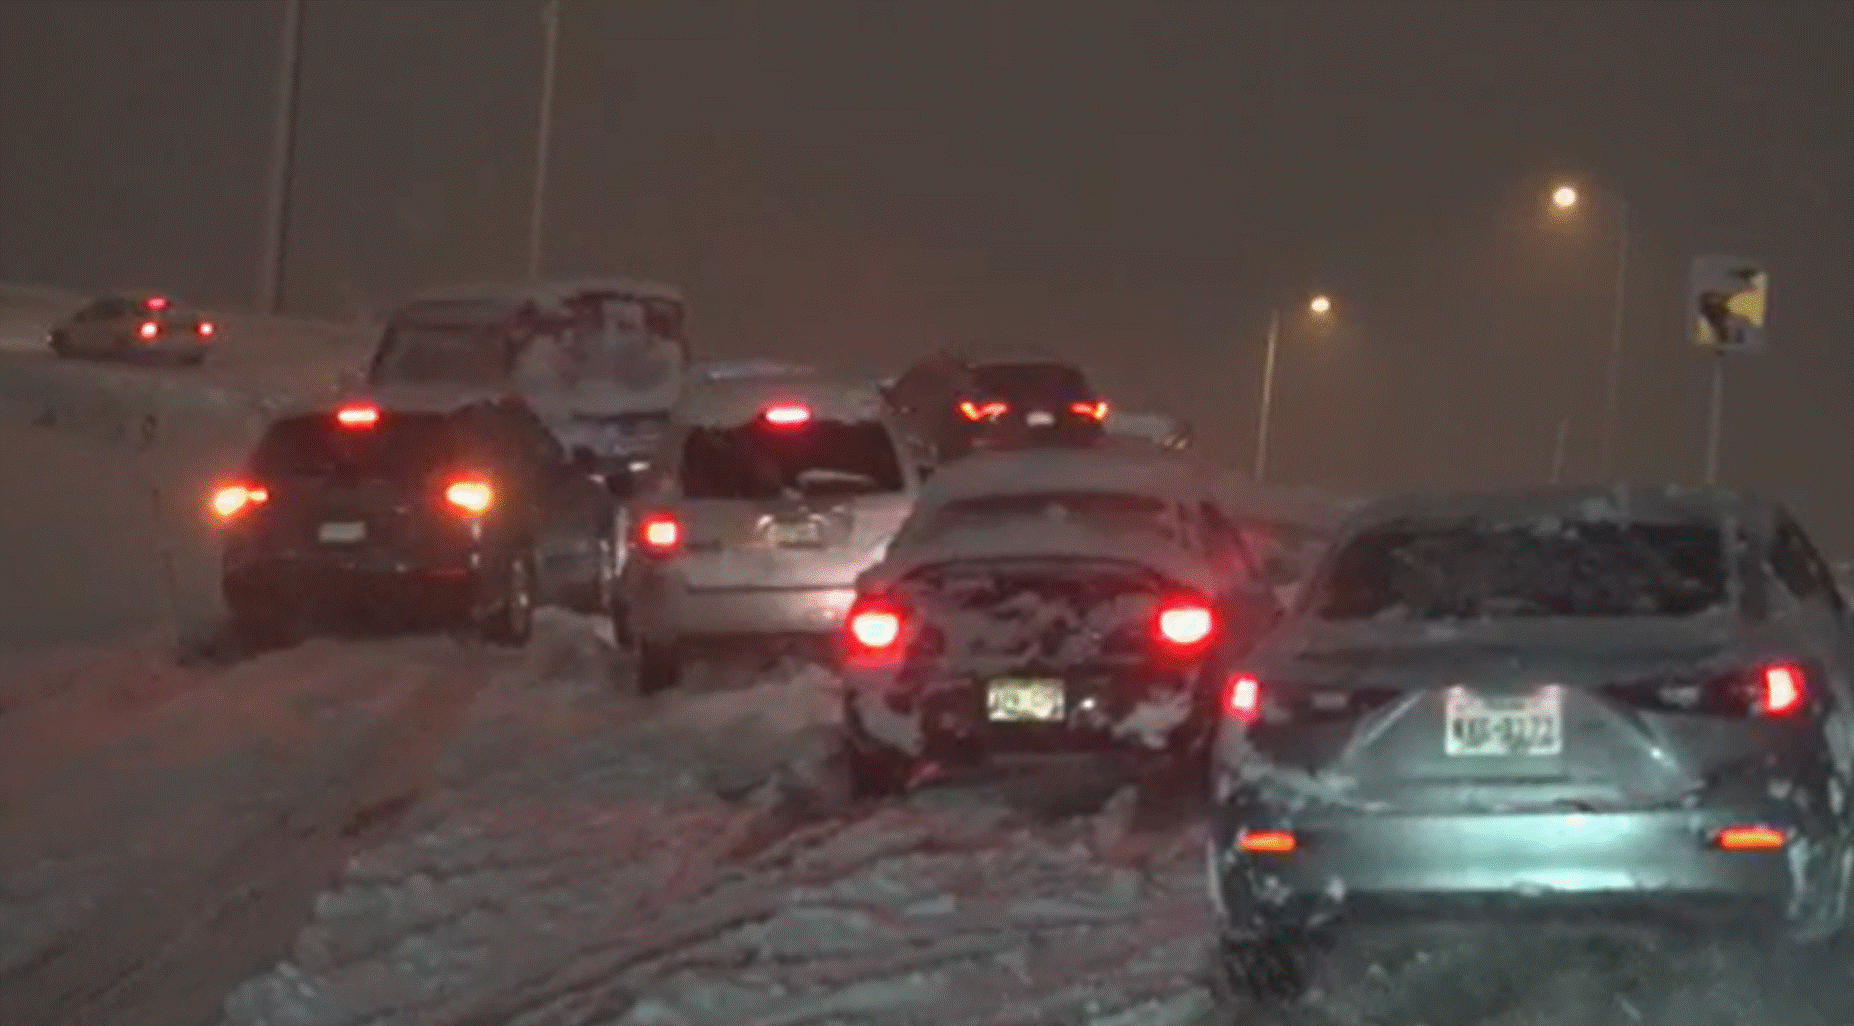   
																Watch: Heavy snow leads to travel nightmare in Denver 
															 